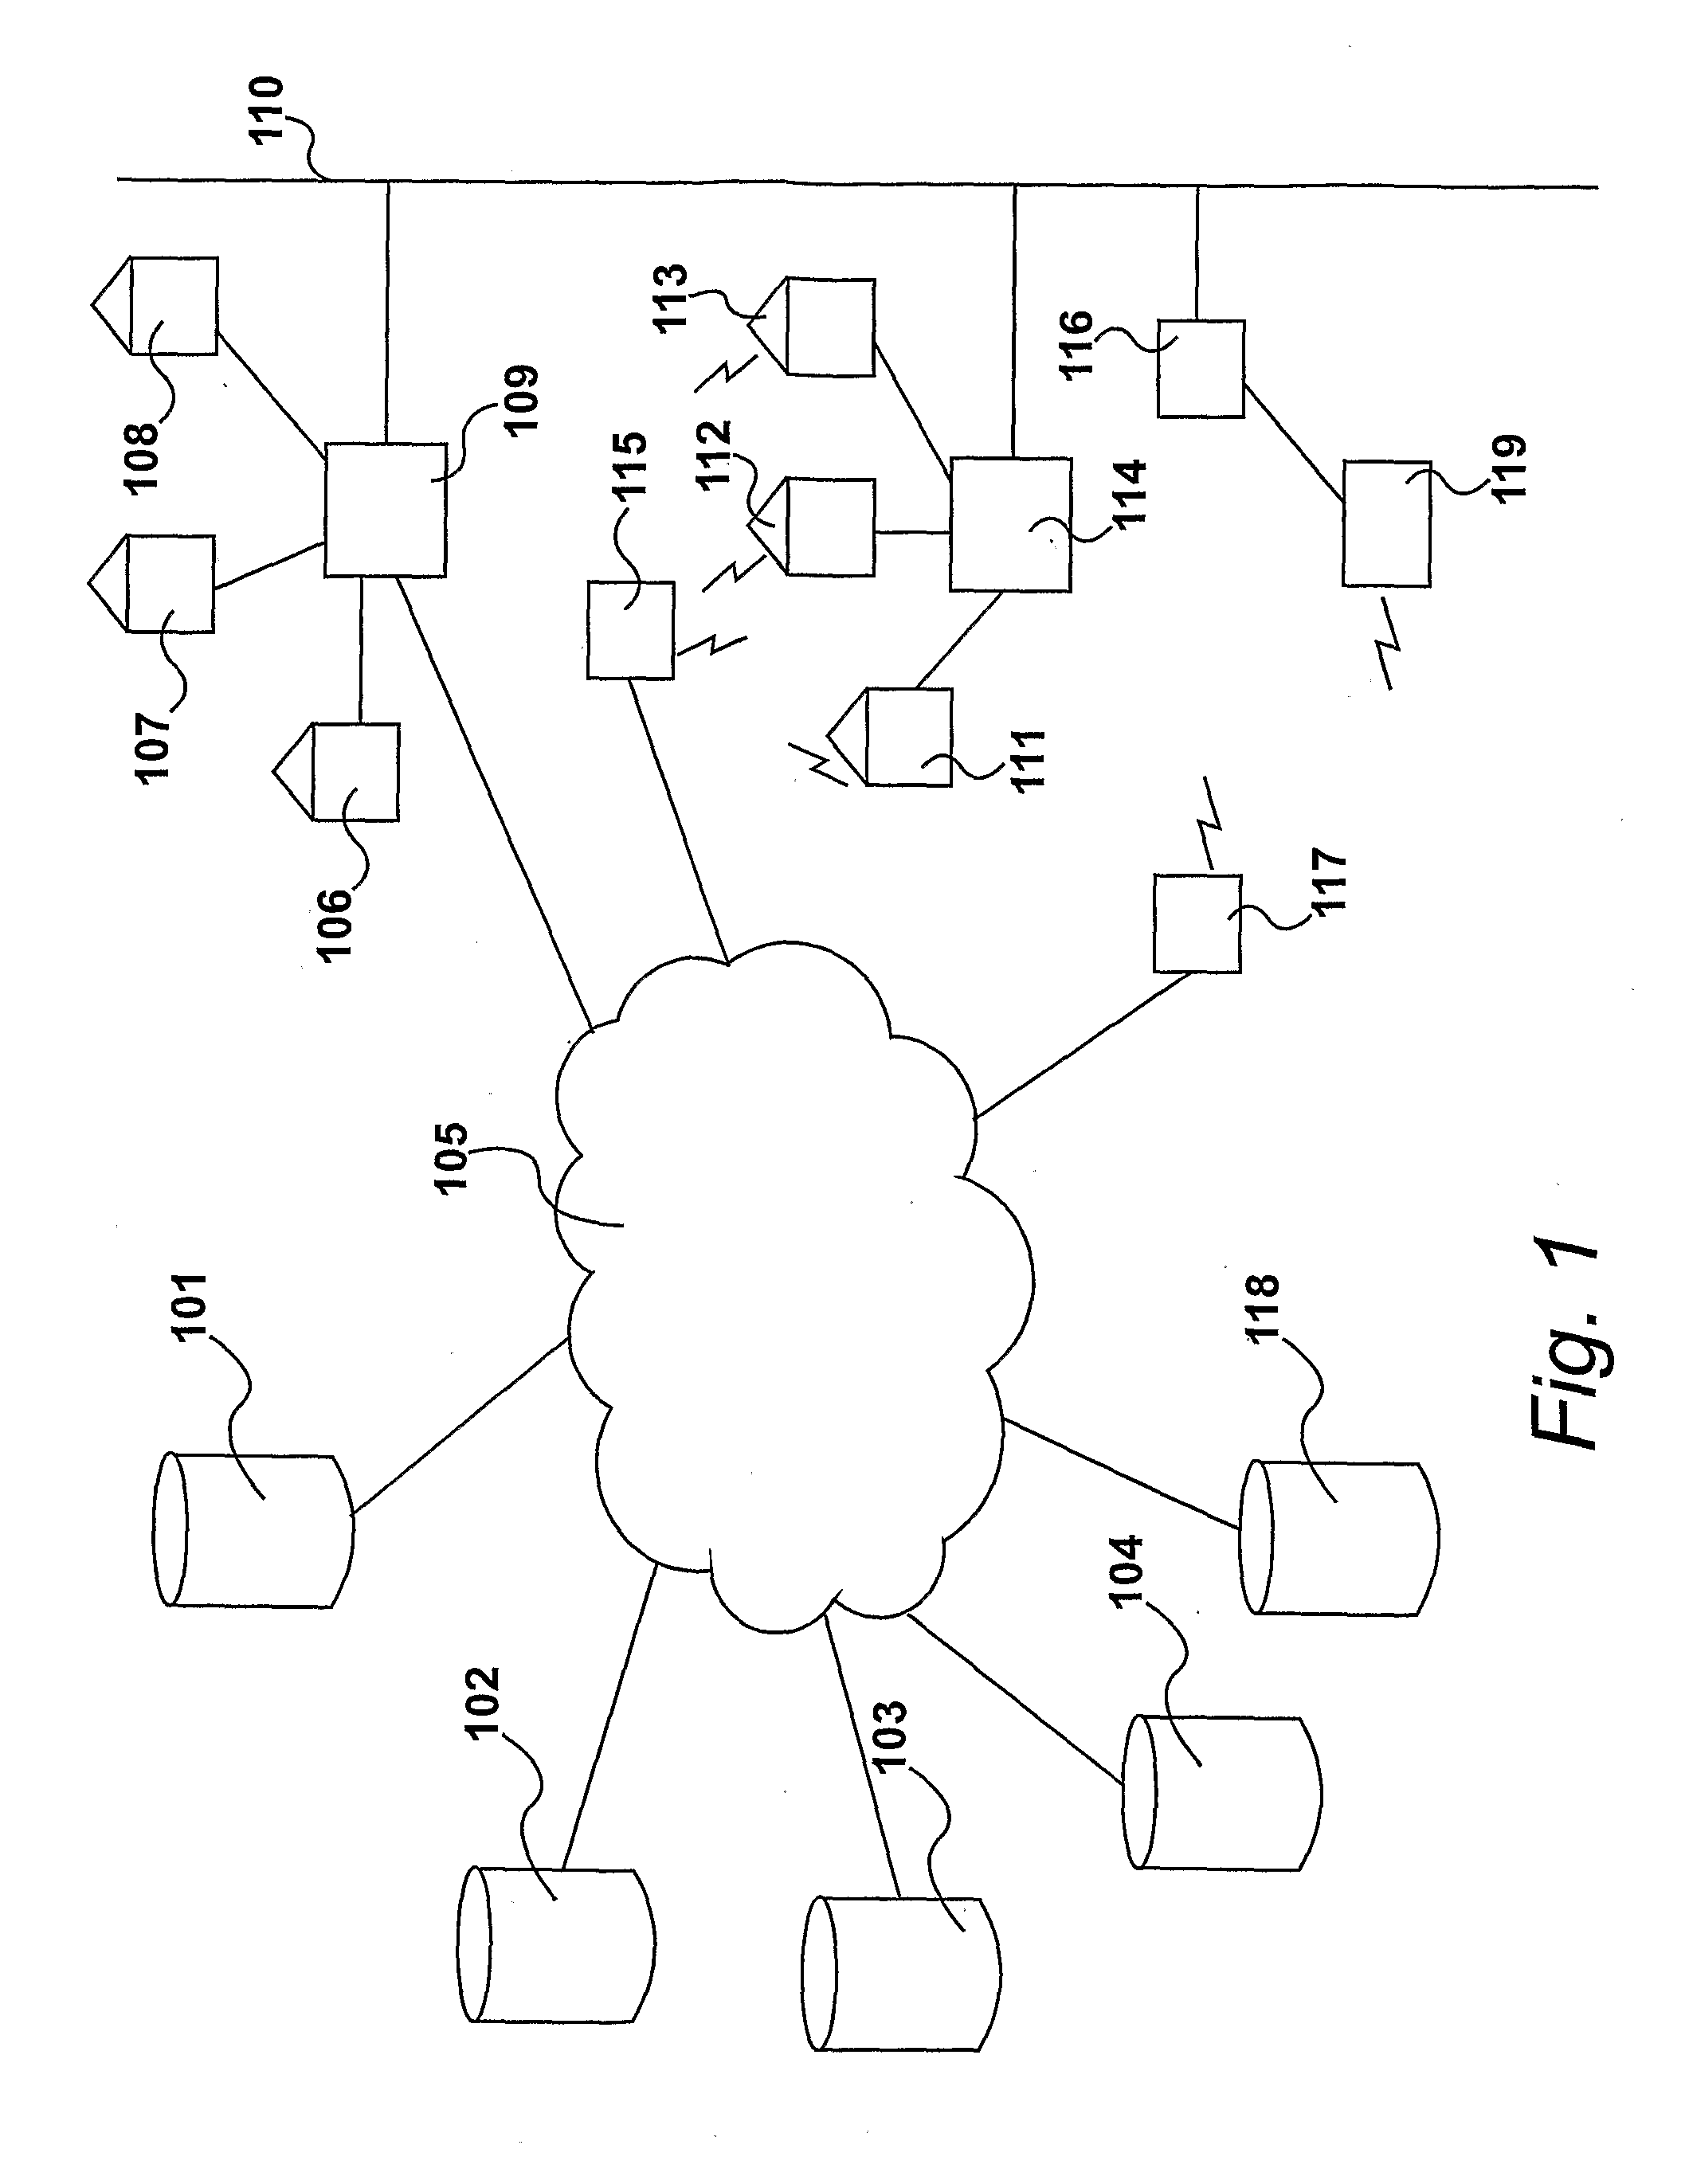 Facilitating secure communication between utility devices